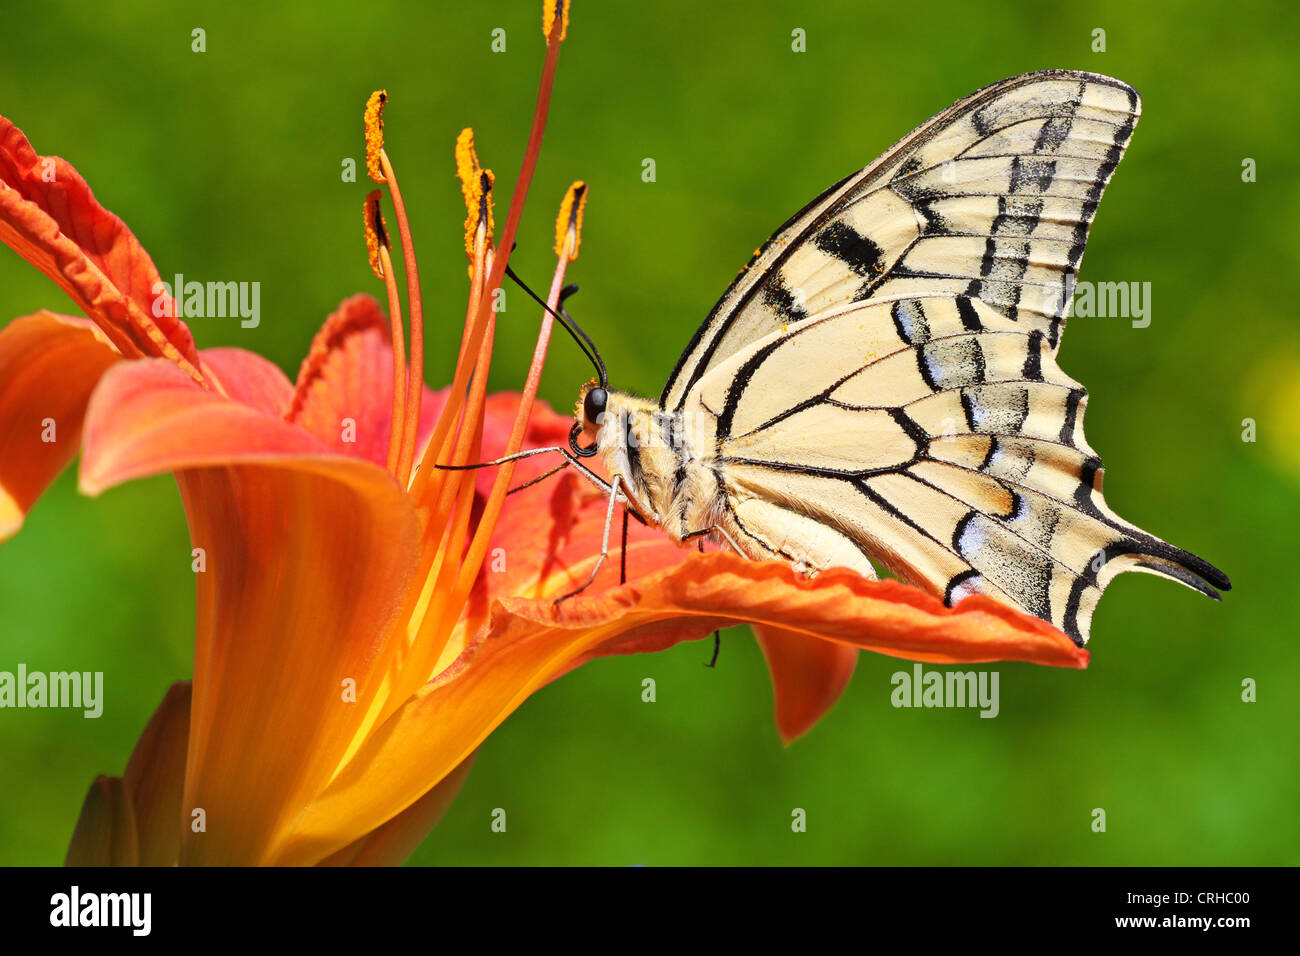 Close up of butterfly Papilio Machaon assis sur lily Banque D'Images